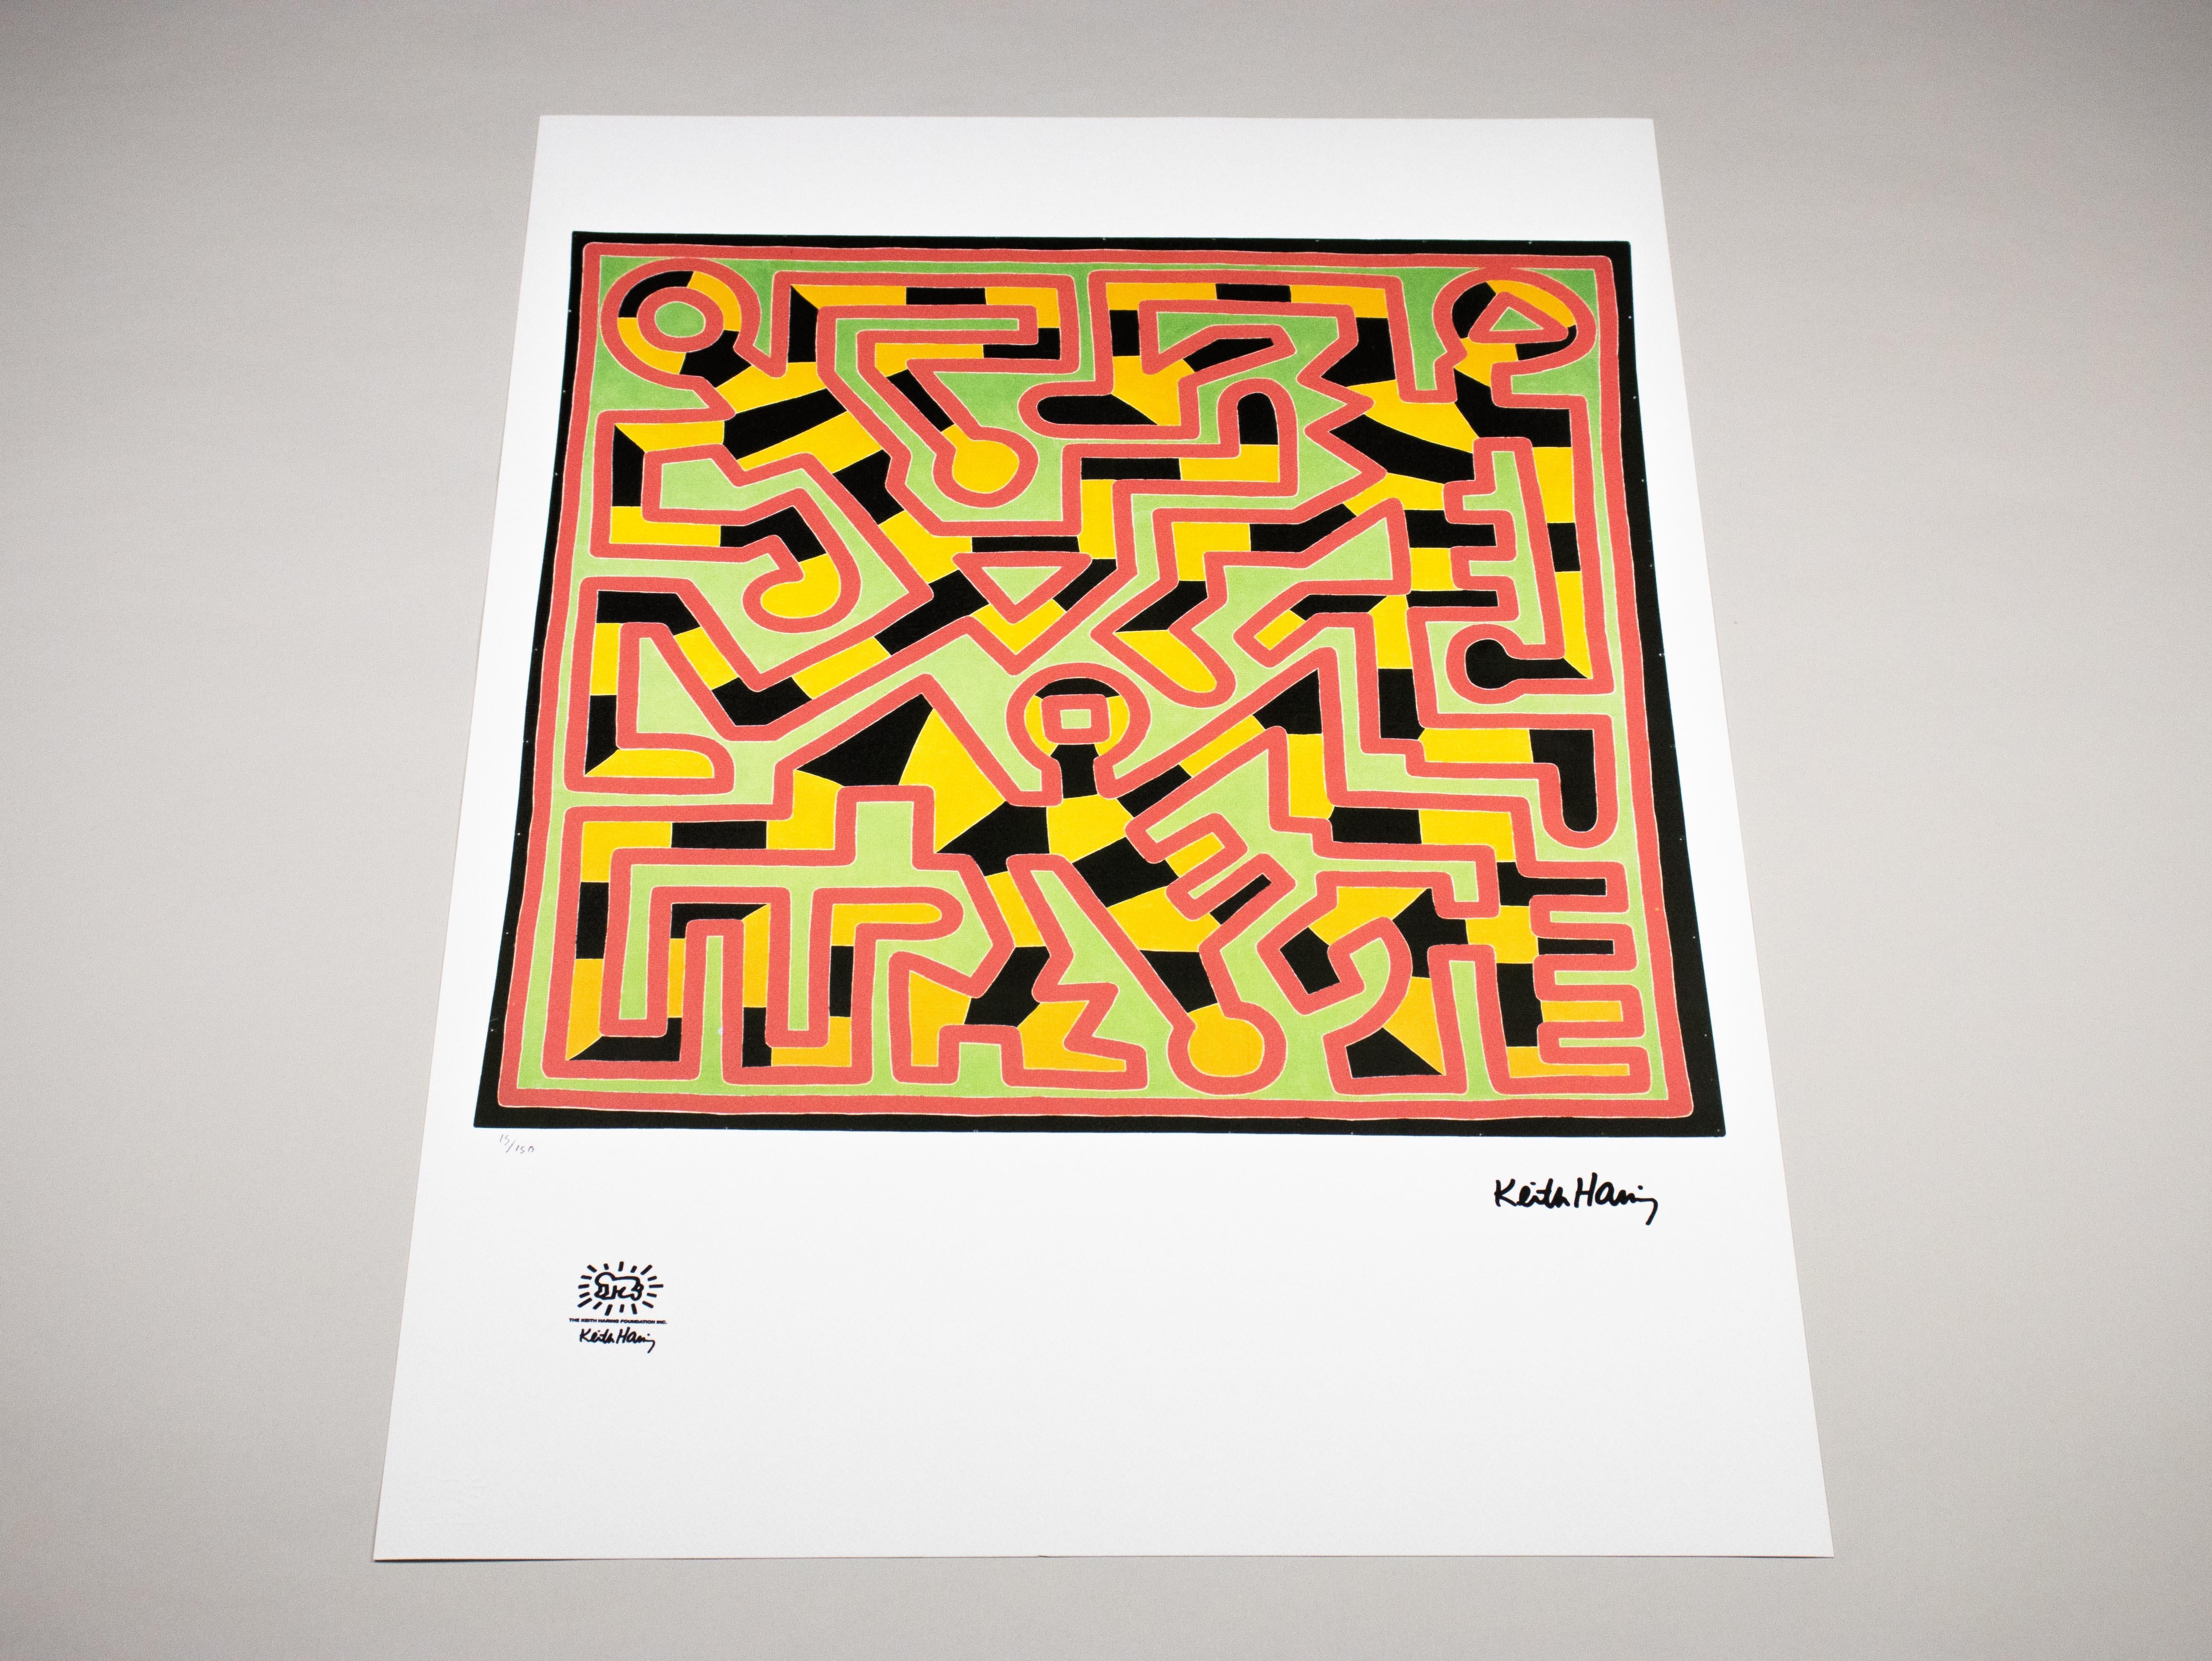 Lithograph - Limited Edition 15/150 - Keith Haring Foundation Inc. For Sale 5